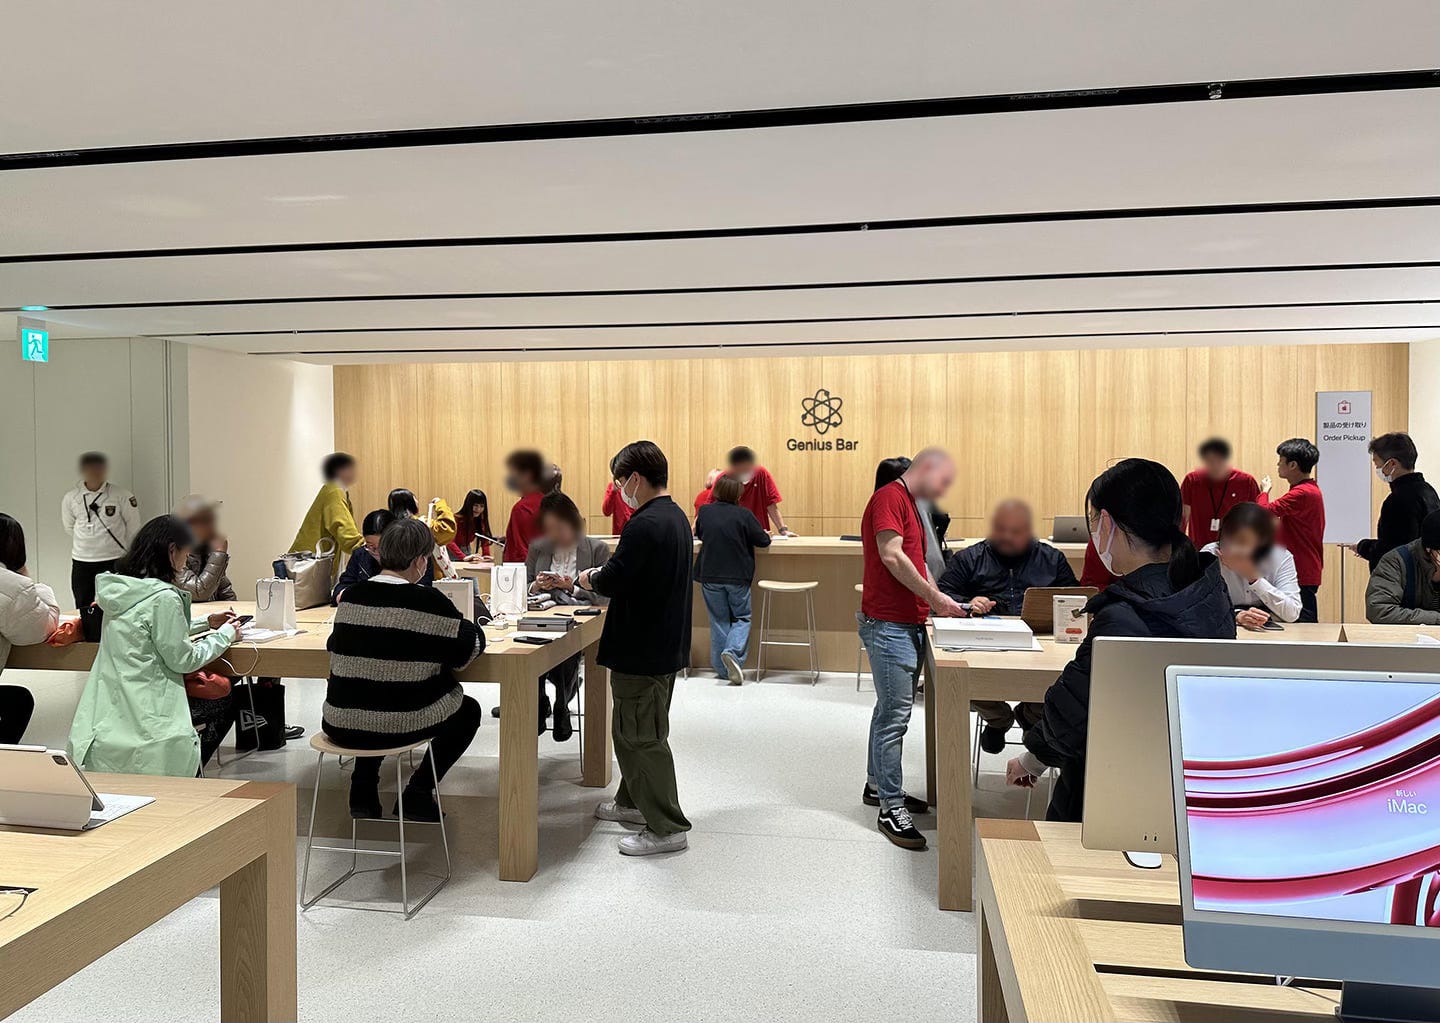 The upper level of Apple Shinsaibashi. A large Genius Bar with a wood back wall spans the far side of the store.